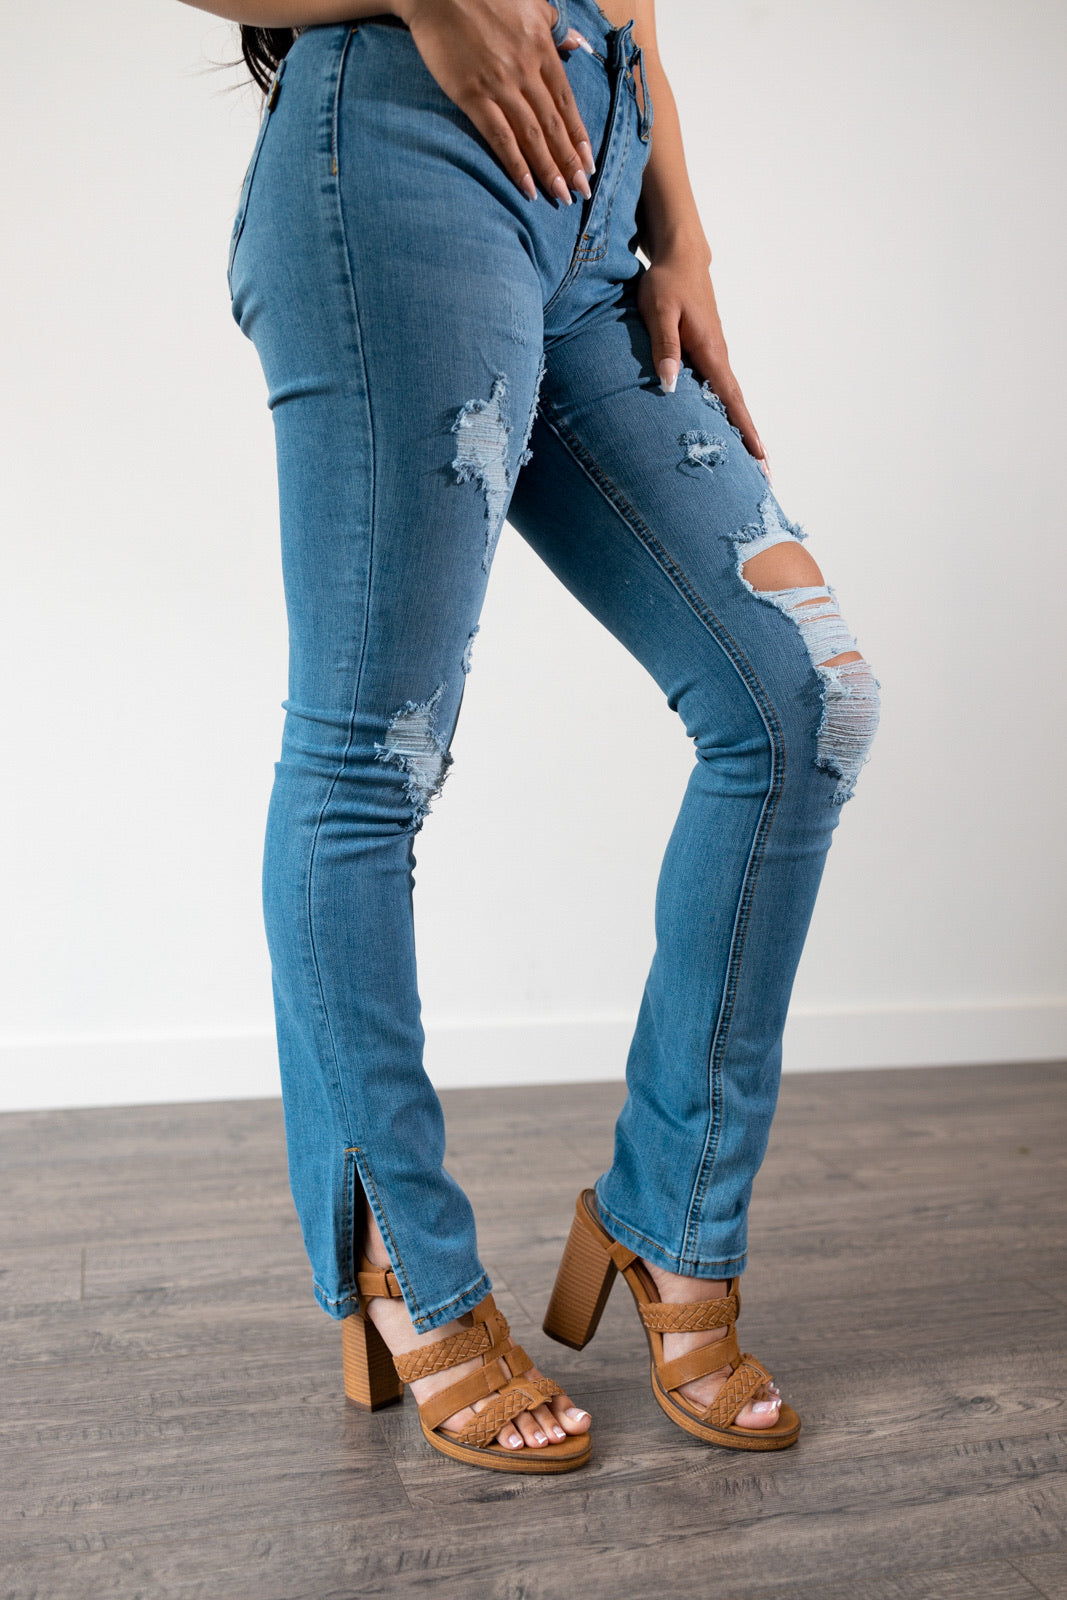 Side view of the Malika Distressed High-Rise Bootcut Jeans, highlighting the flattering high-waist fit and bootcut slit design.